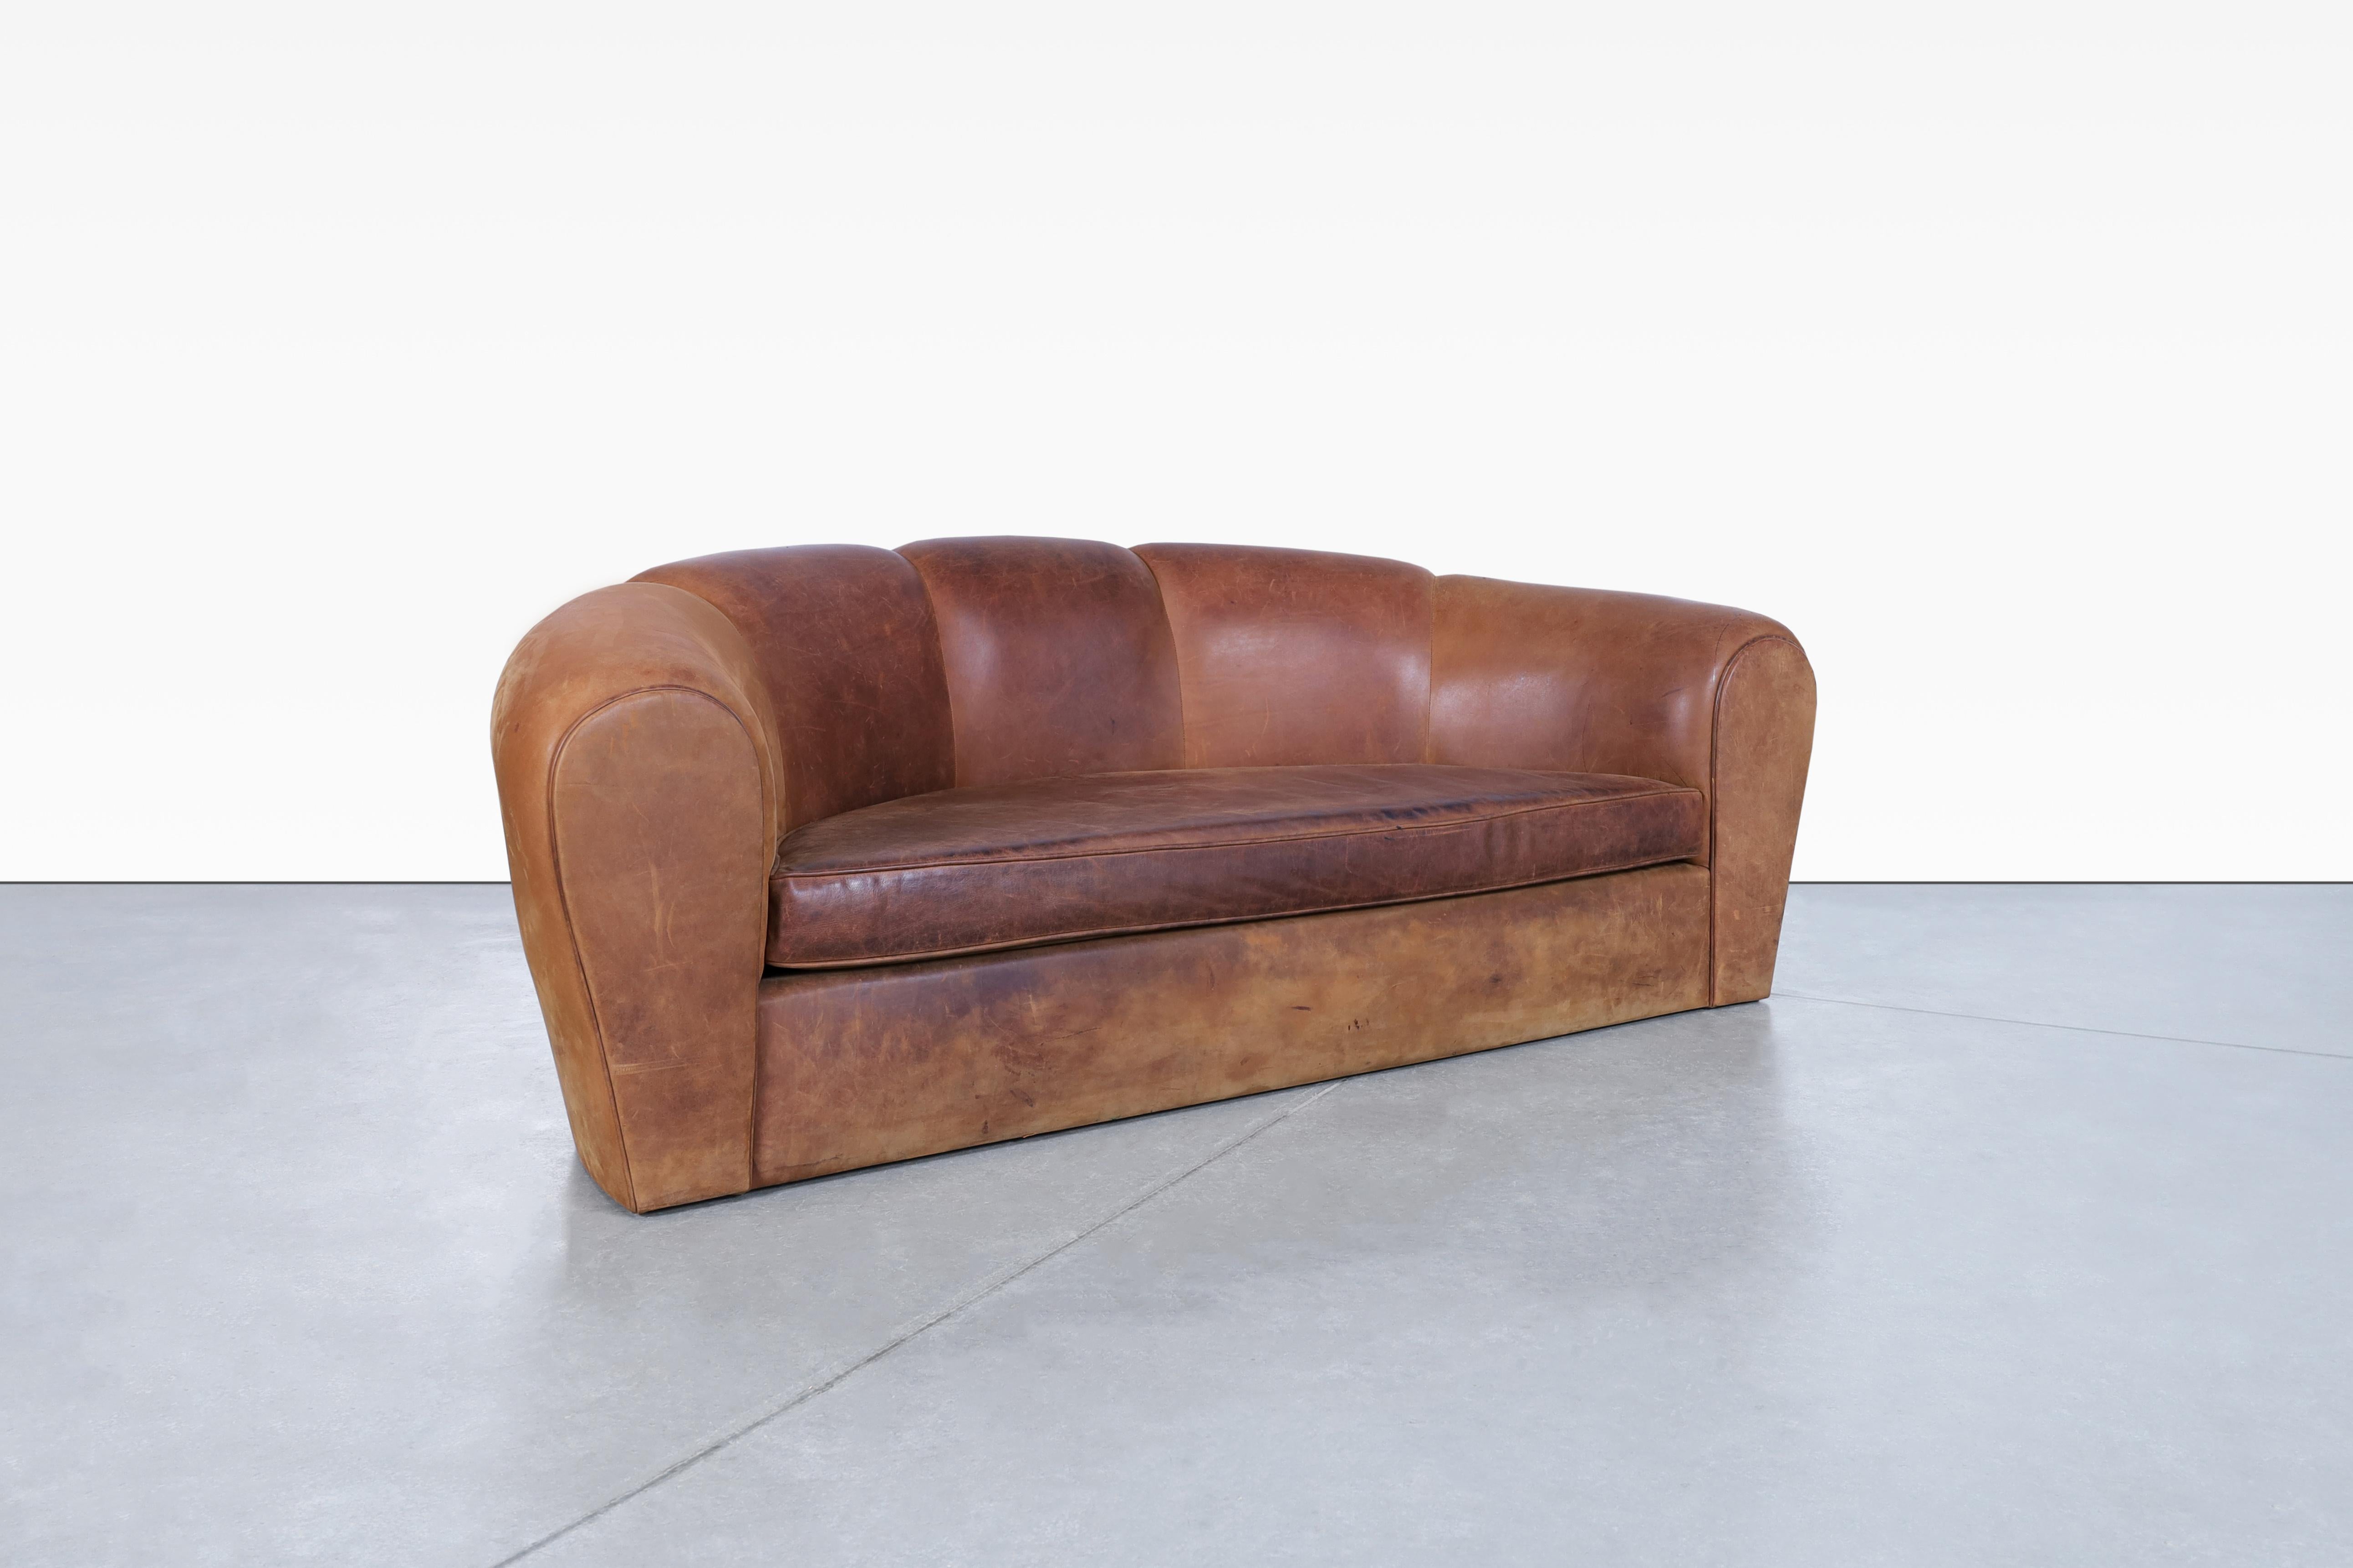 Stunning French art deco leather “Croissant” sofa manufactured in France, circa 1980s. This sofa, adorned in rich brown leather, exudes a sense of elegance. The sturdy construction ensures its durability, promising years of comfort and style. The